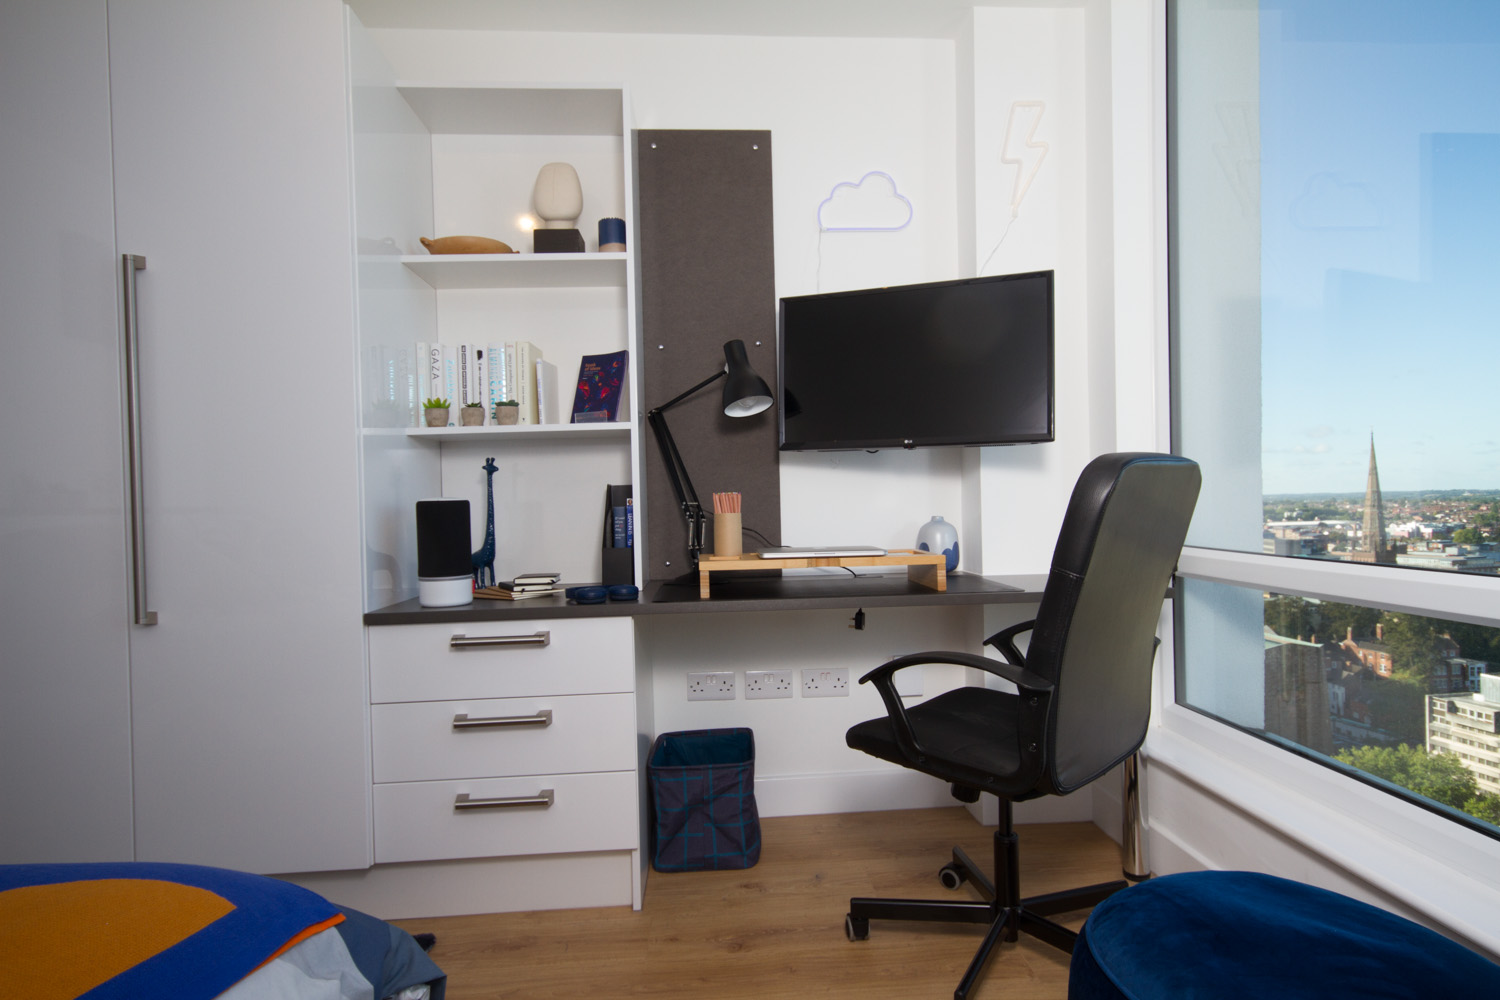 Penthouse Studio Workspace at CODE Coventry Student Accommodation